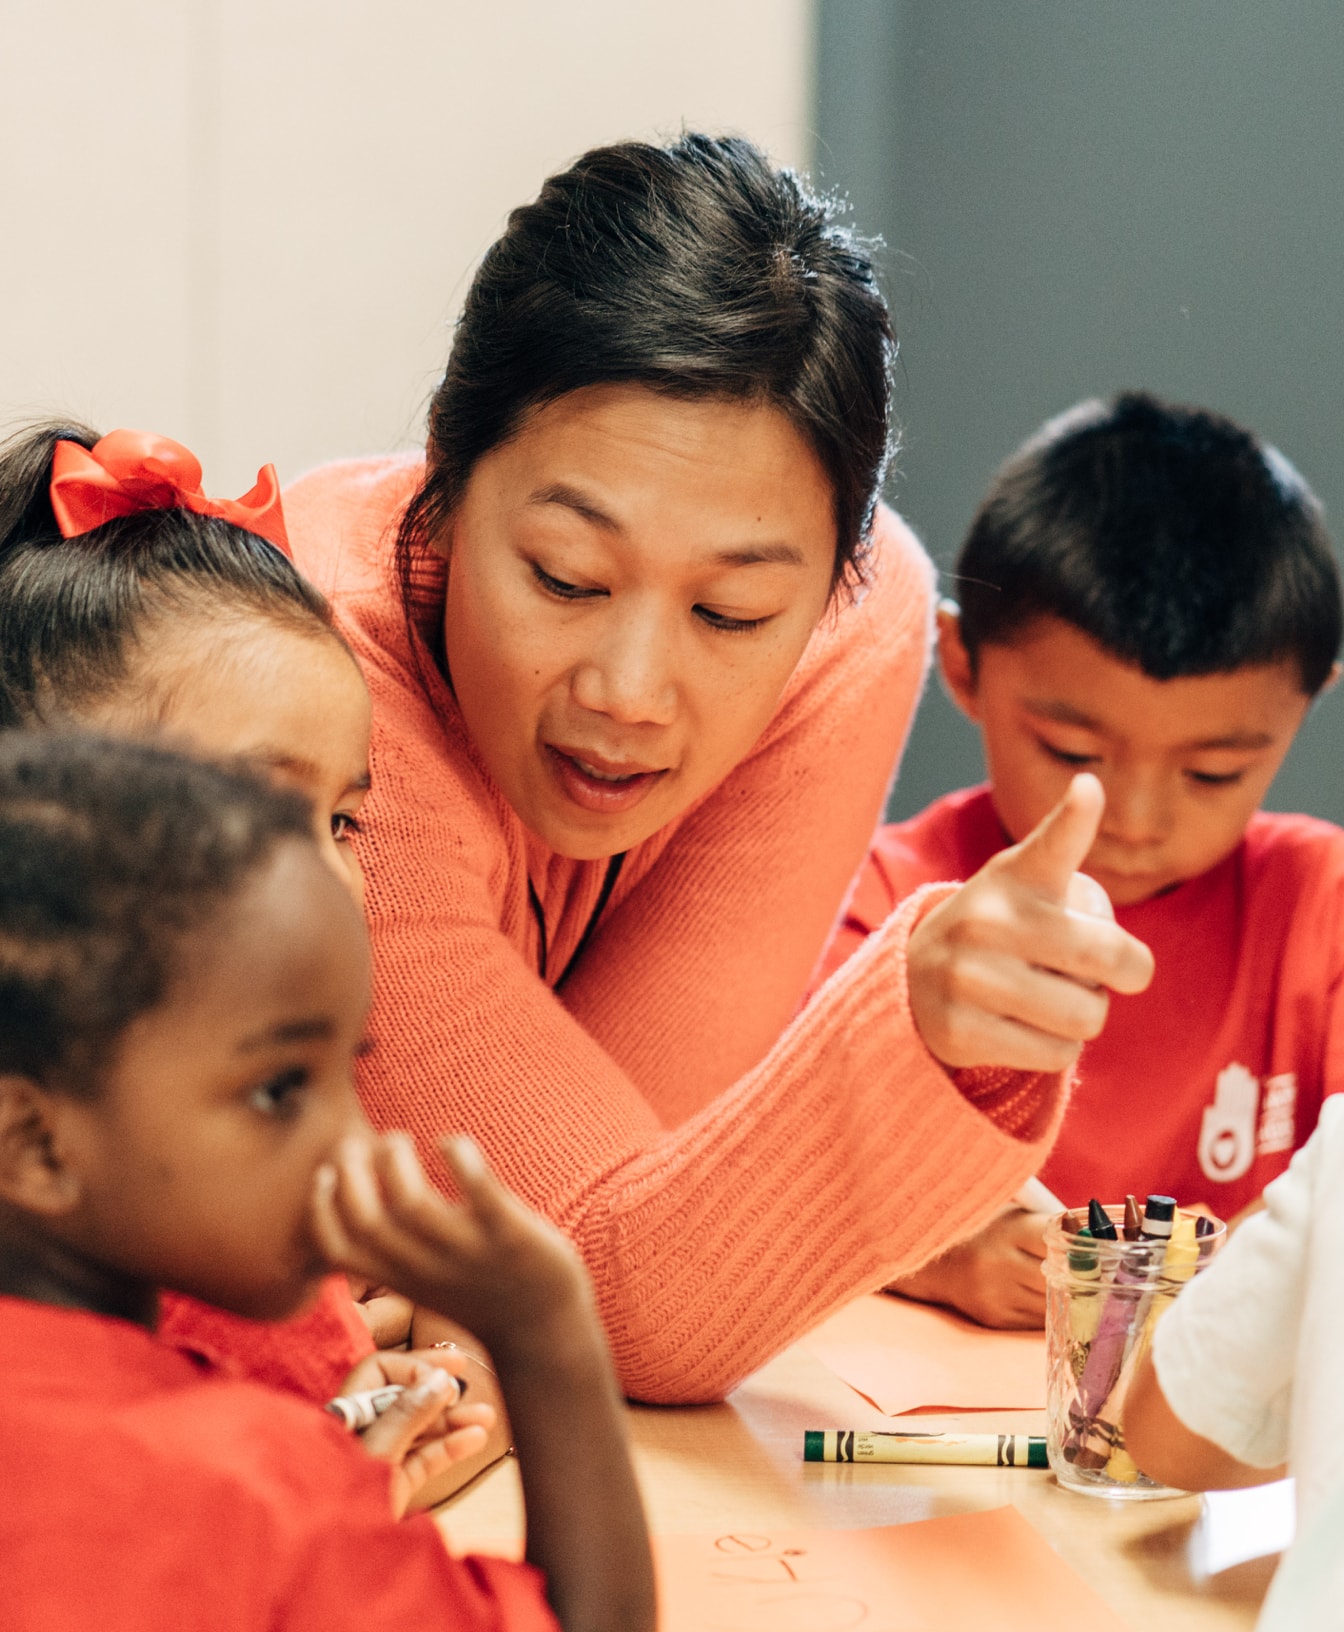 CZI Co-founder and Co-CEO Priscilla Chan with children at The Primary School, which she founded in East Palo Alto (Education).